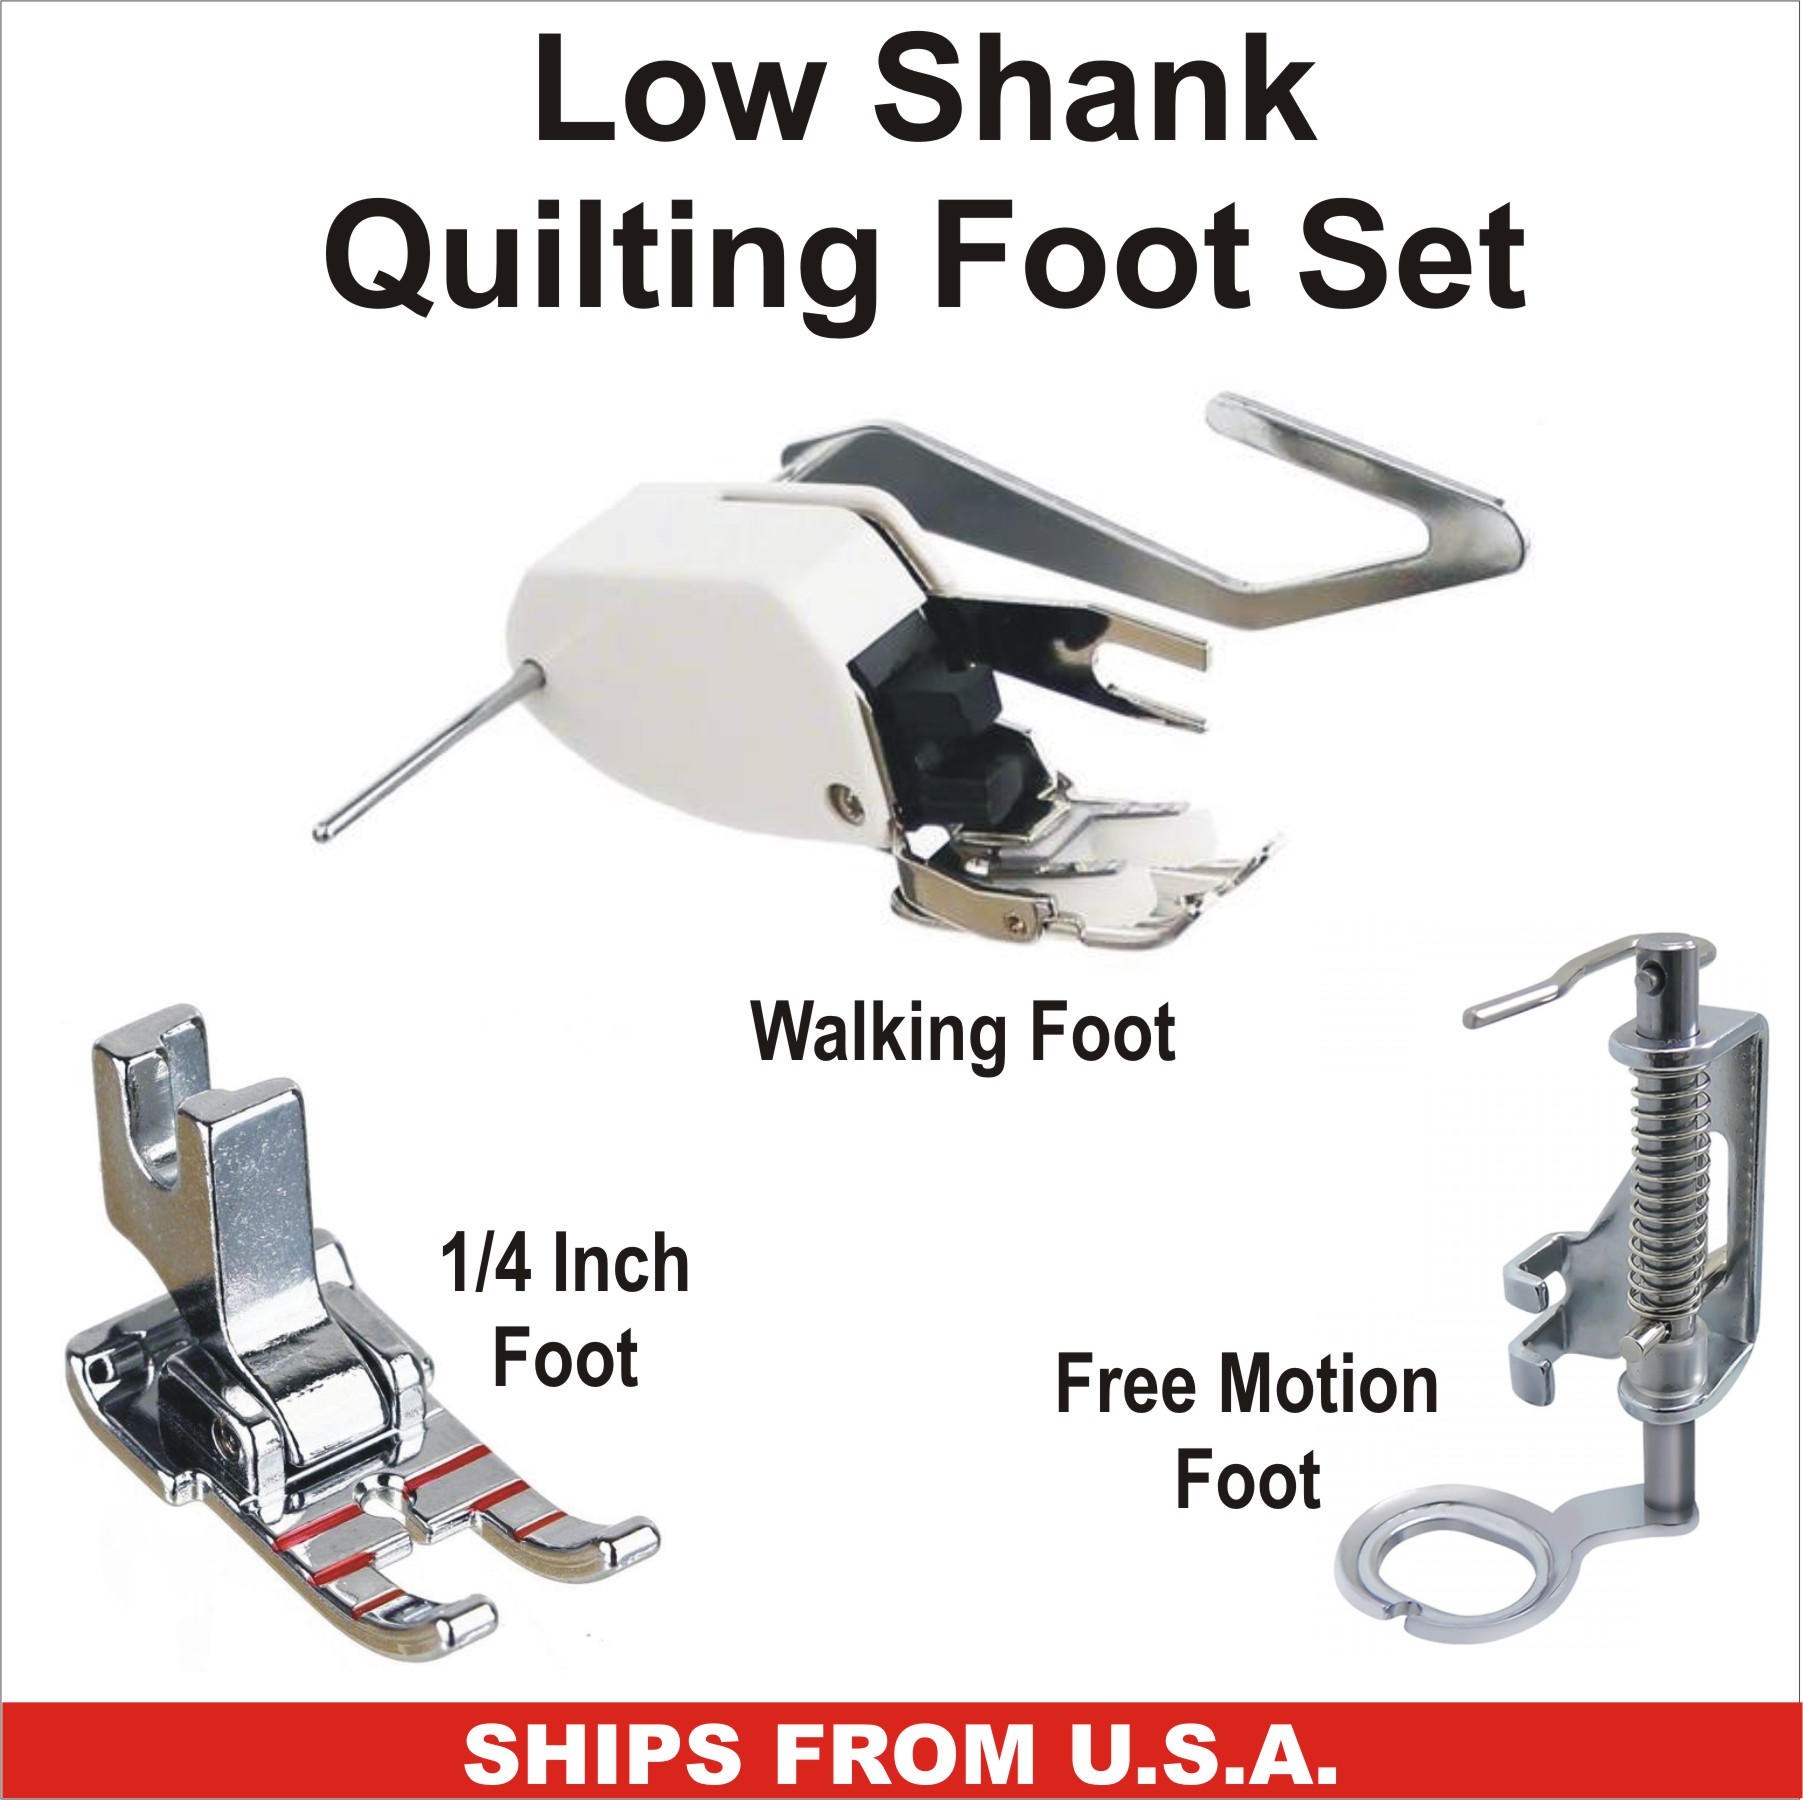 Quilting Foot Set Fits All Low Shank Sewing Machines SINGER, BROTHER,  JANOME & More See Description